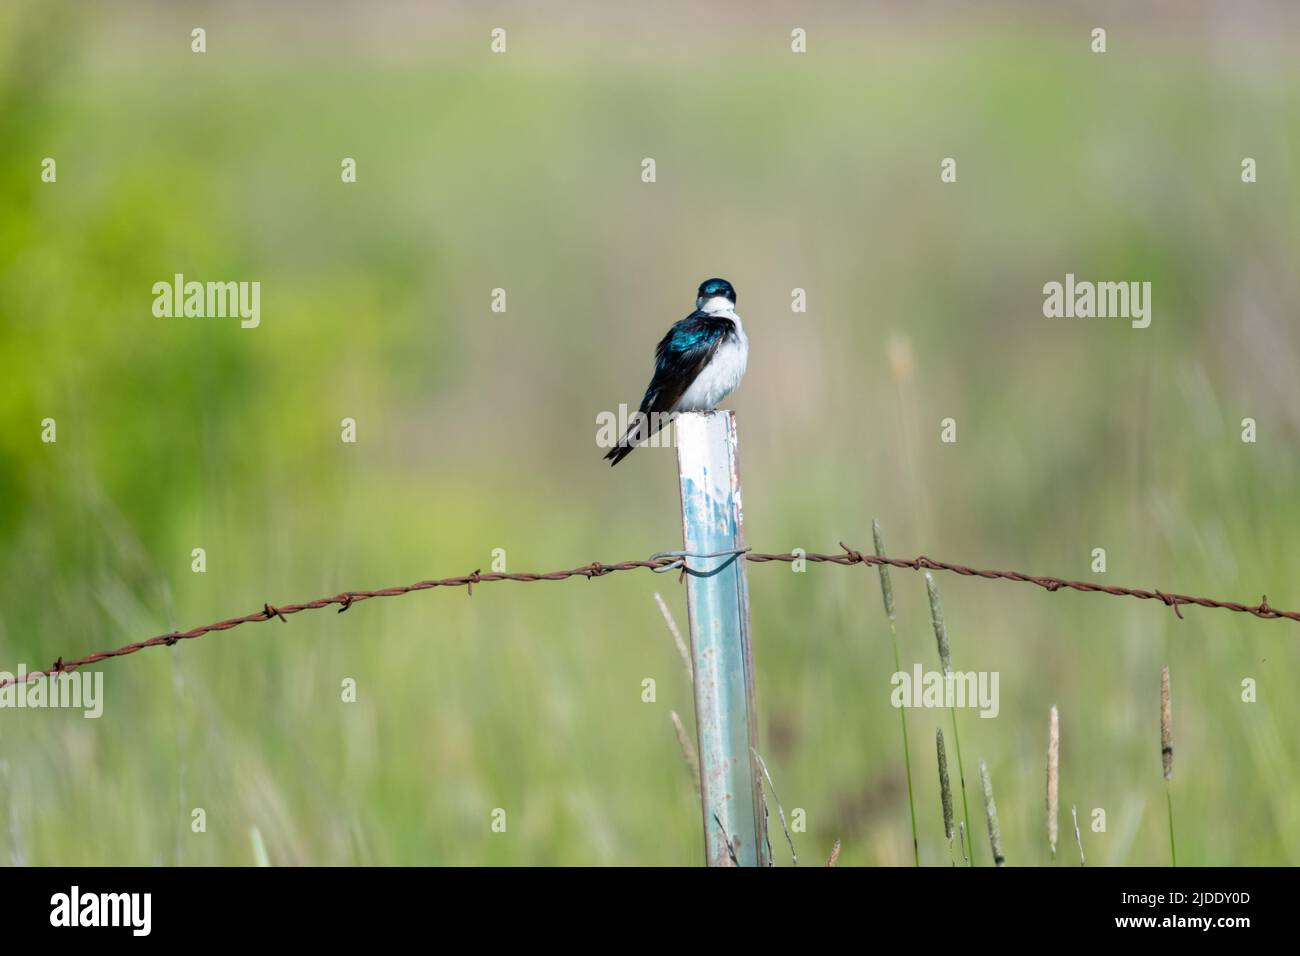 Tree Swallow, Tachycineta bicolor, perching on a barbed wire fence in a field. Small bird. Stock Photo